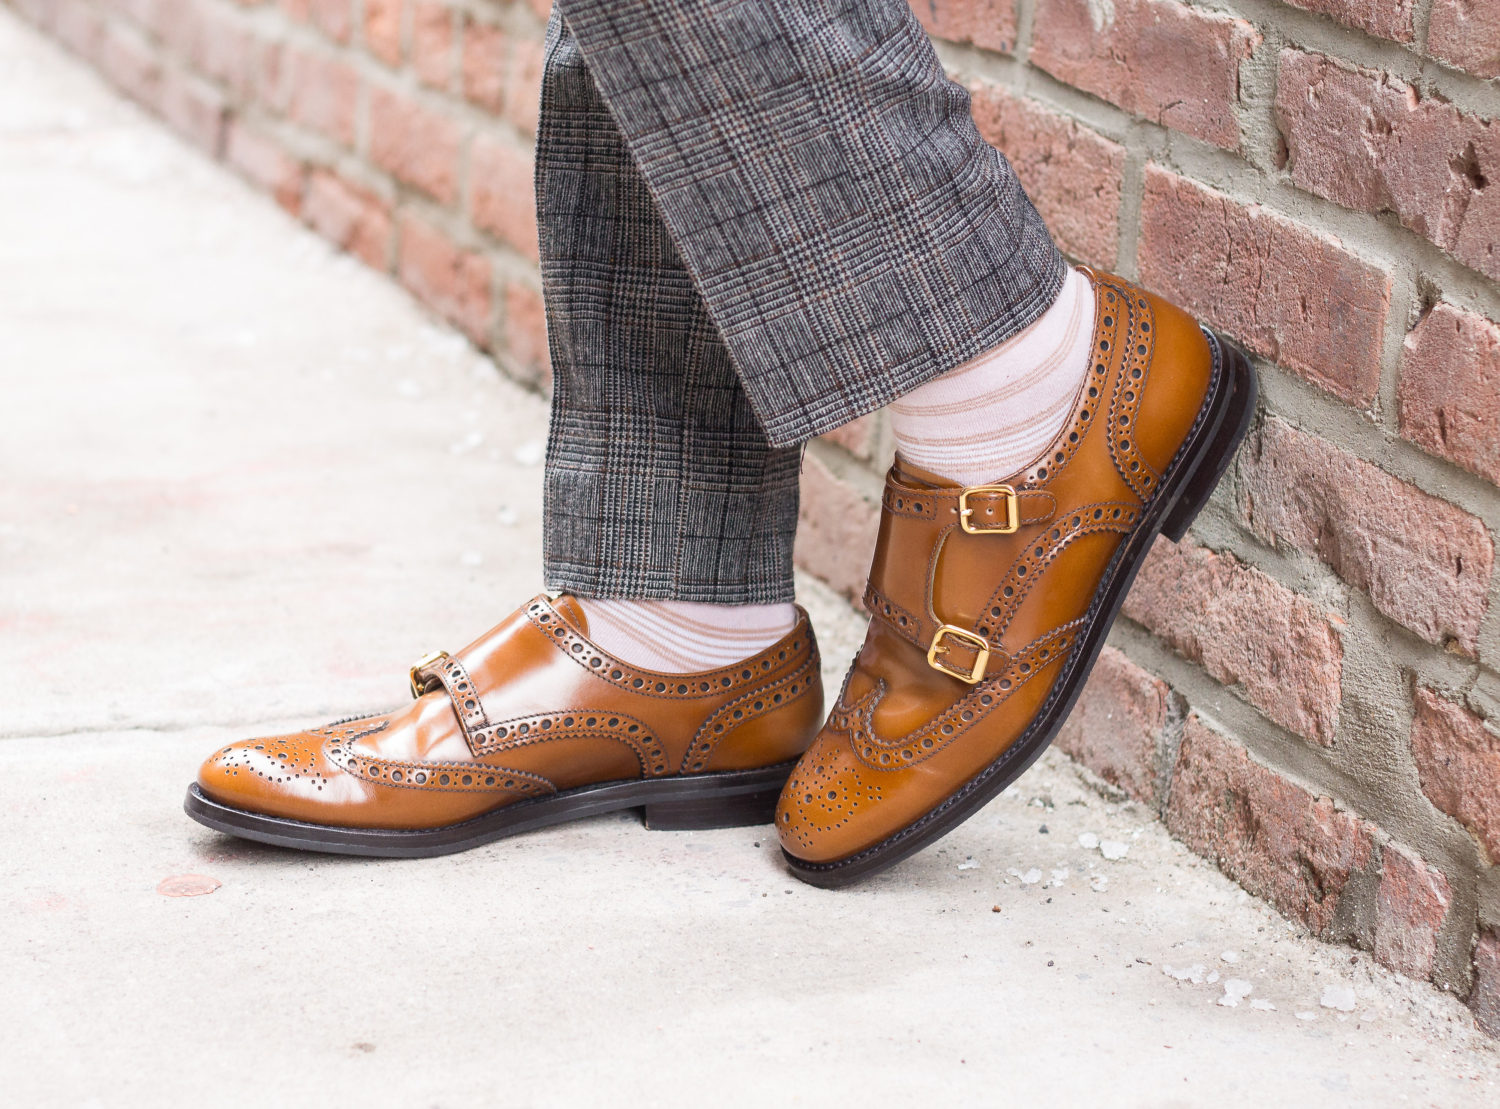 Dress Shoes for Masculine Presenting Style